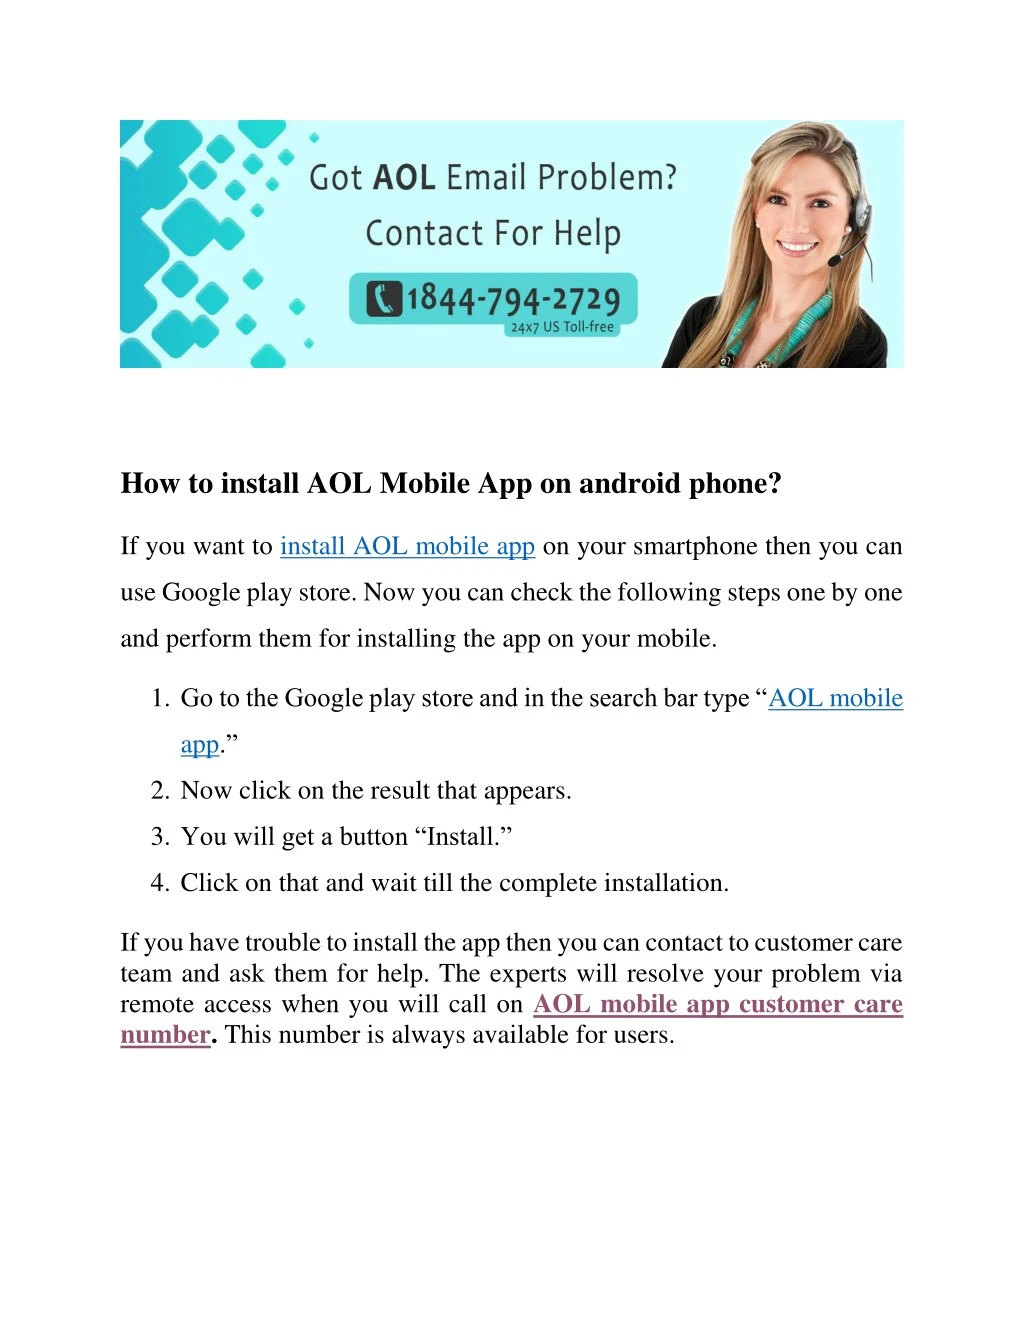 how to install aol mobile app on android phone